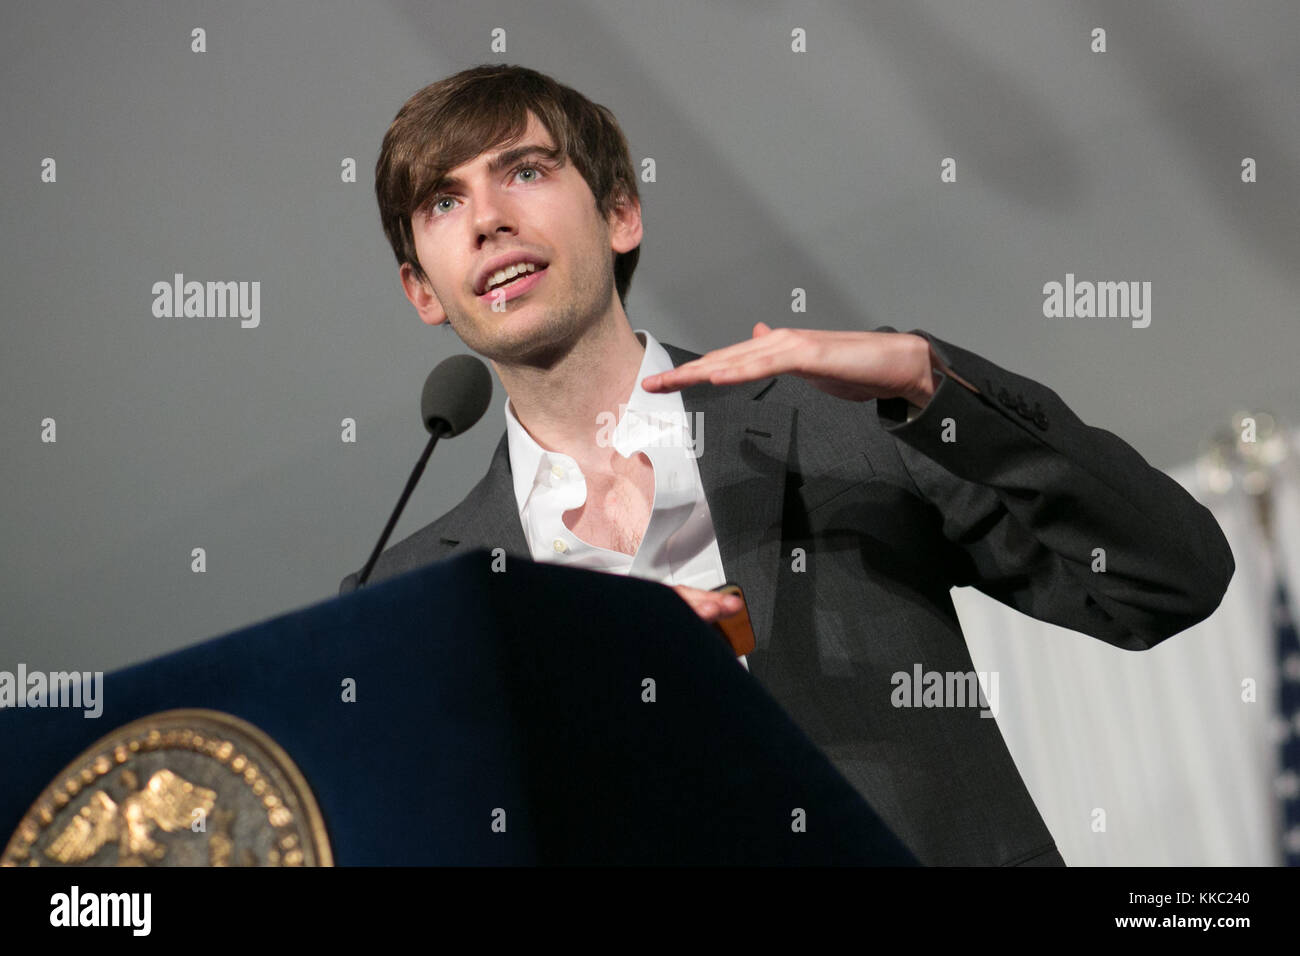 Founder of Tumblr David Karp at the 8th Annual 'Made In NY Awards' at Gracie Mansion on June 10, 2013 in New York. Stock Photo